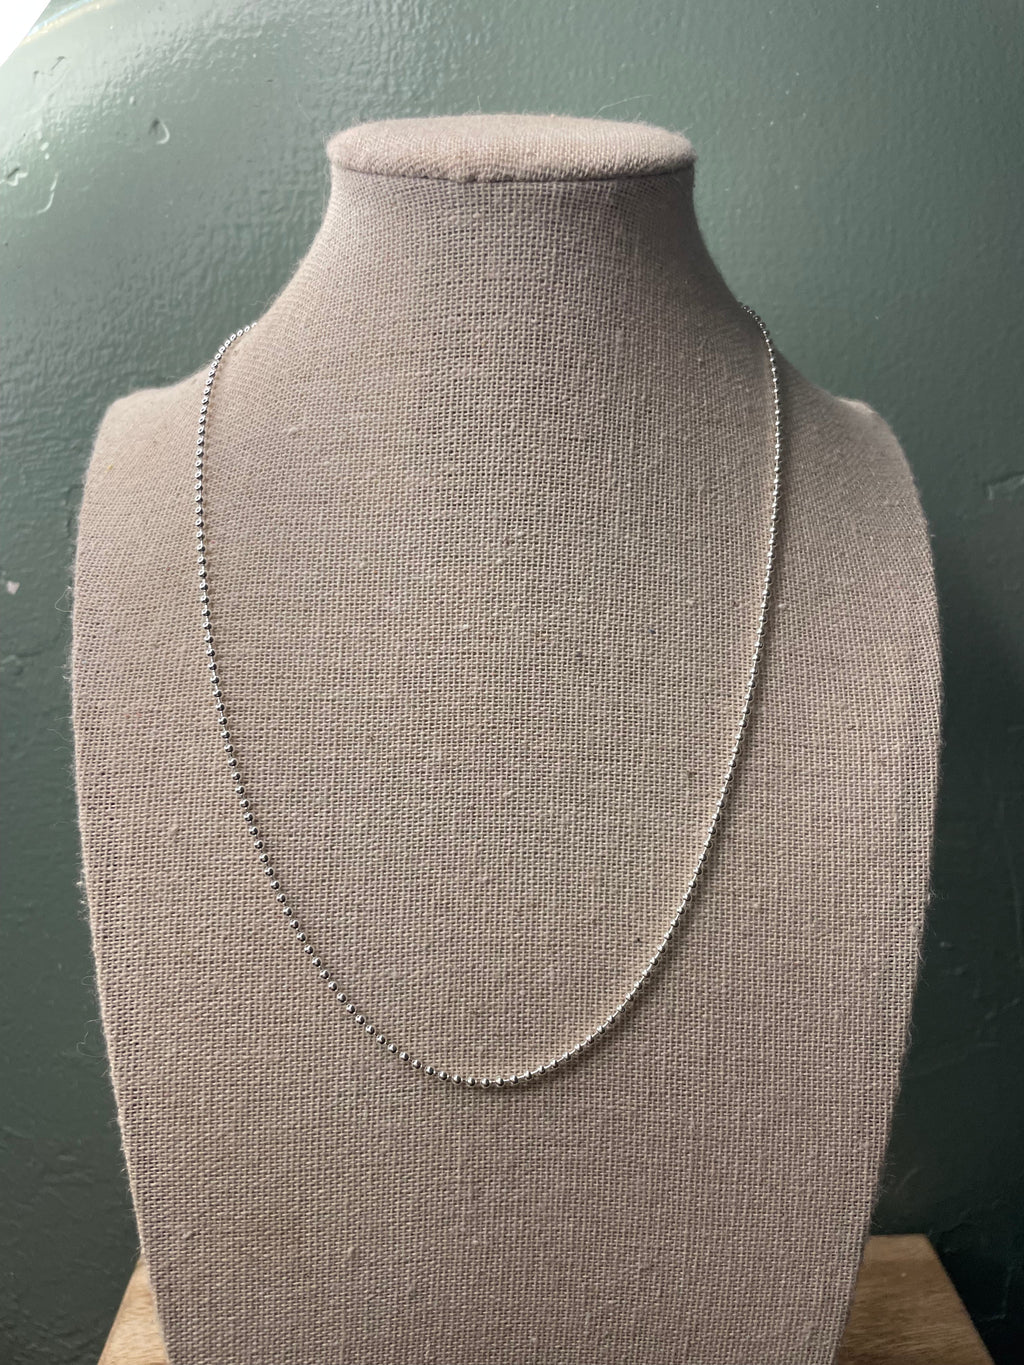 2mm Sterling Silver Pearl Beaded 18” Necklace